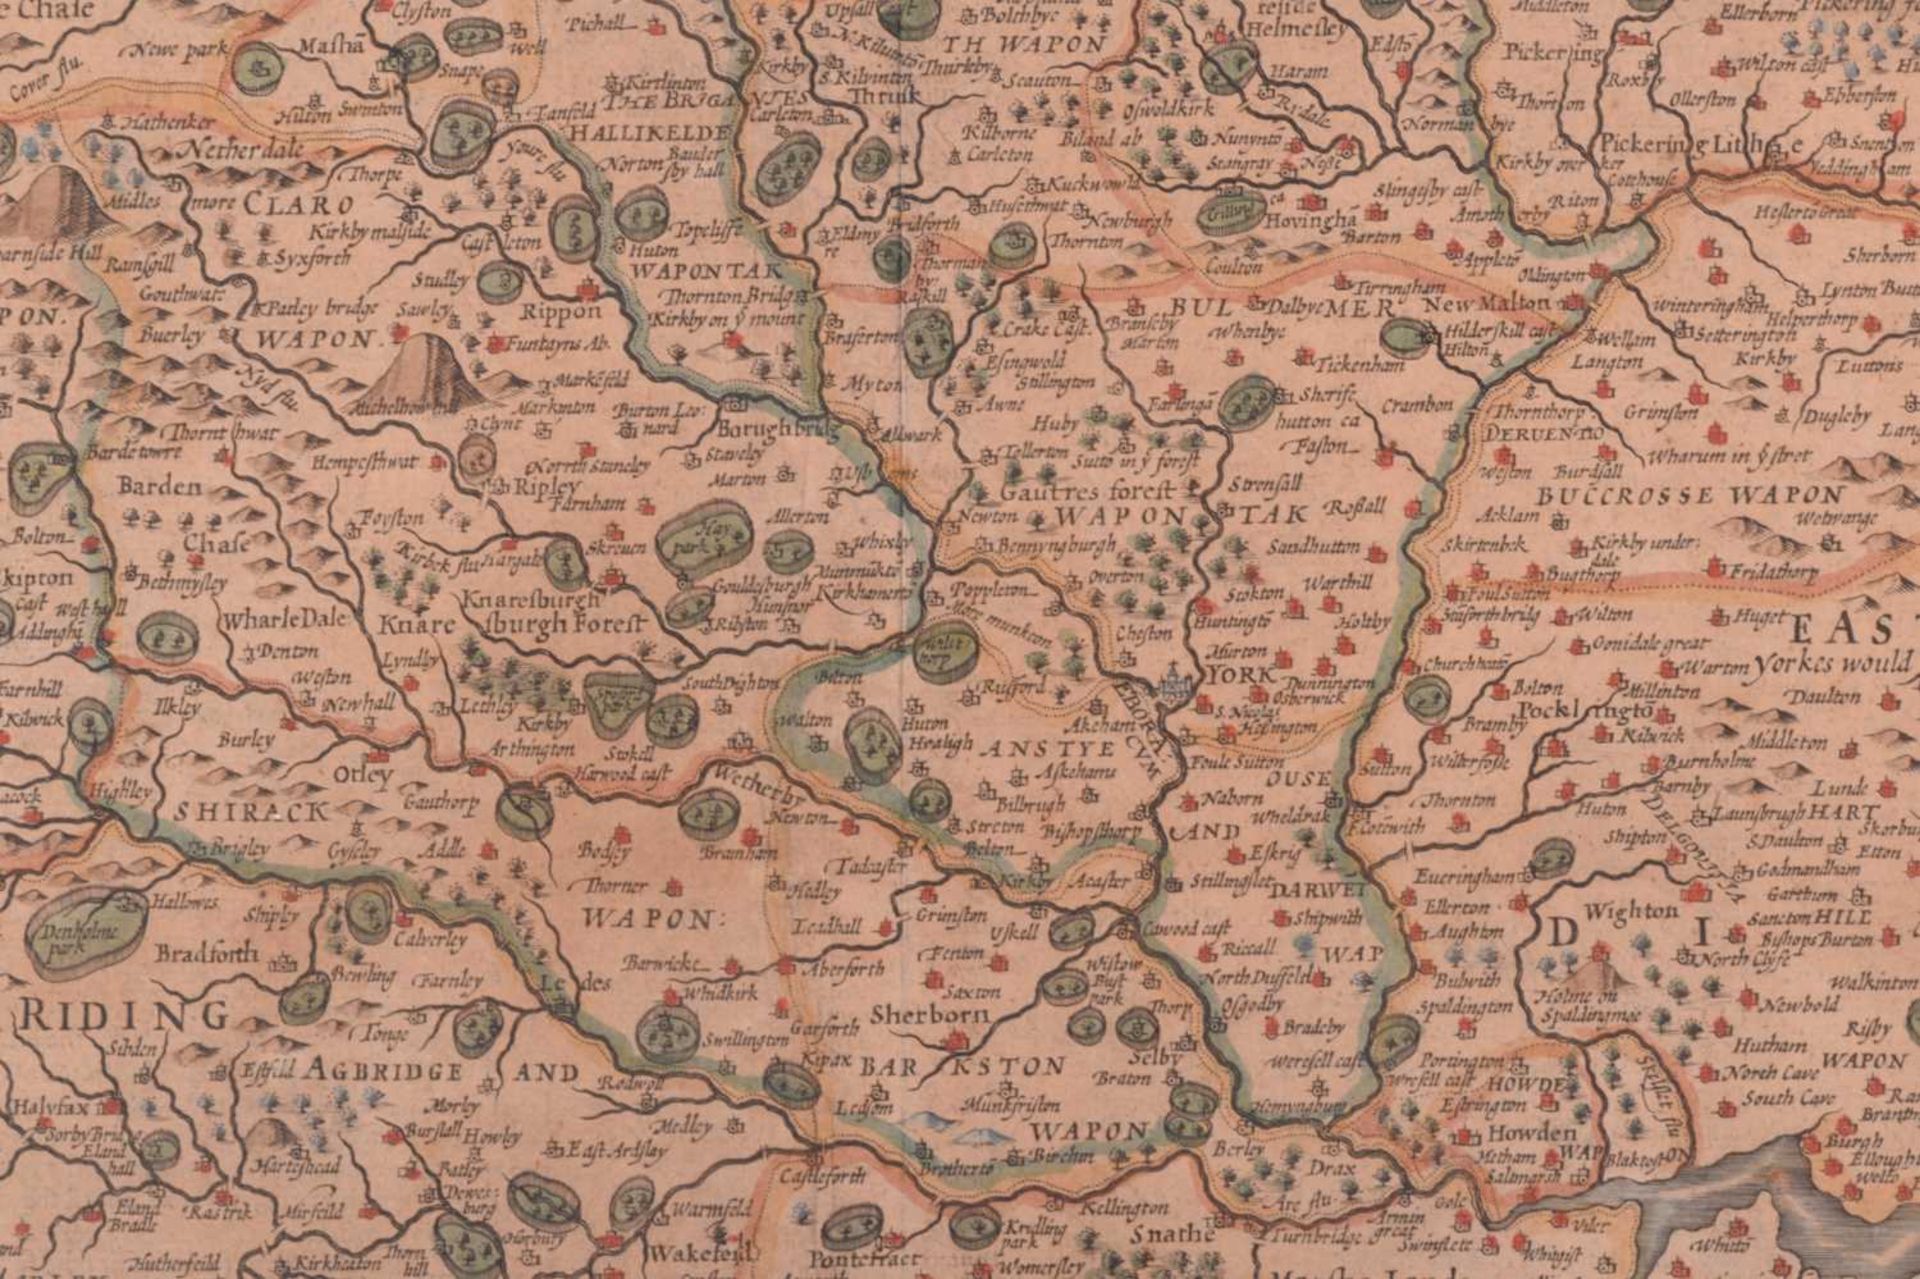 After John Speed, 'The Countie Palatine of Lancaster Described and Divided into Hundreds 1610', - Image 3 of 16